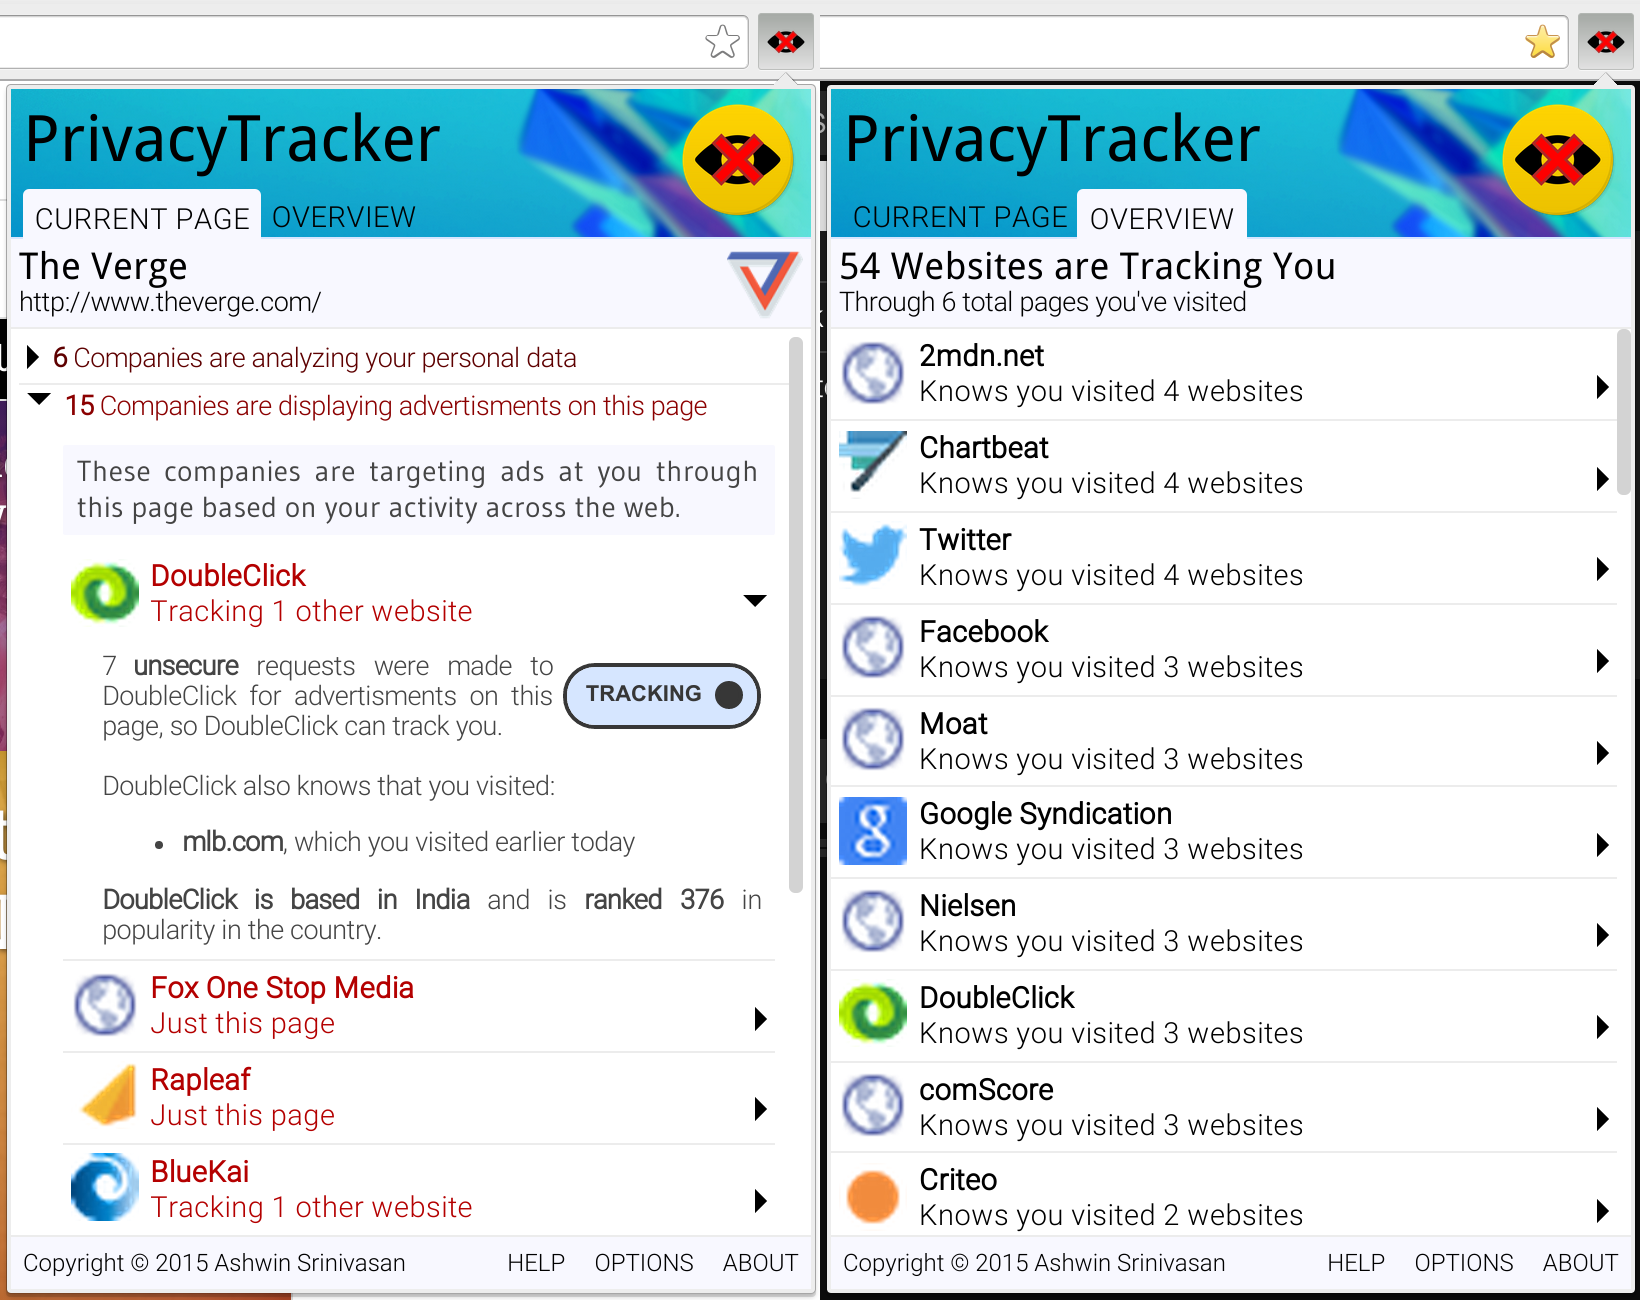 PrivacyTracker provides user-centered data about trackers